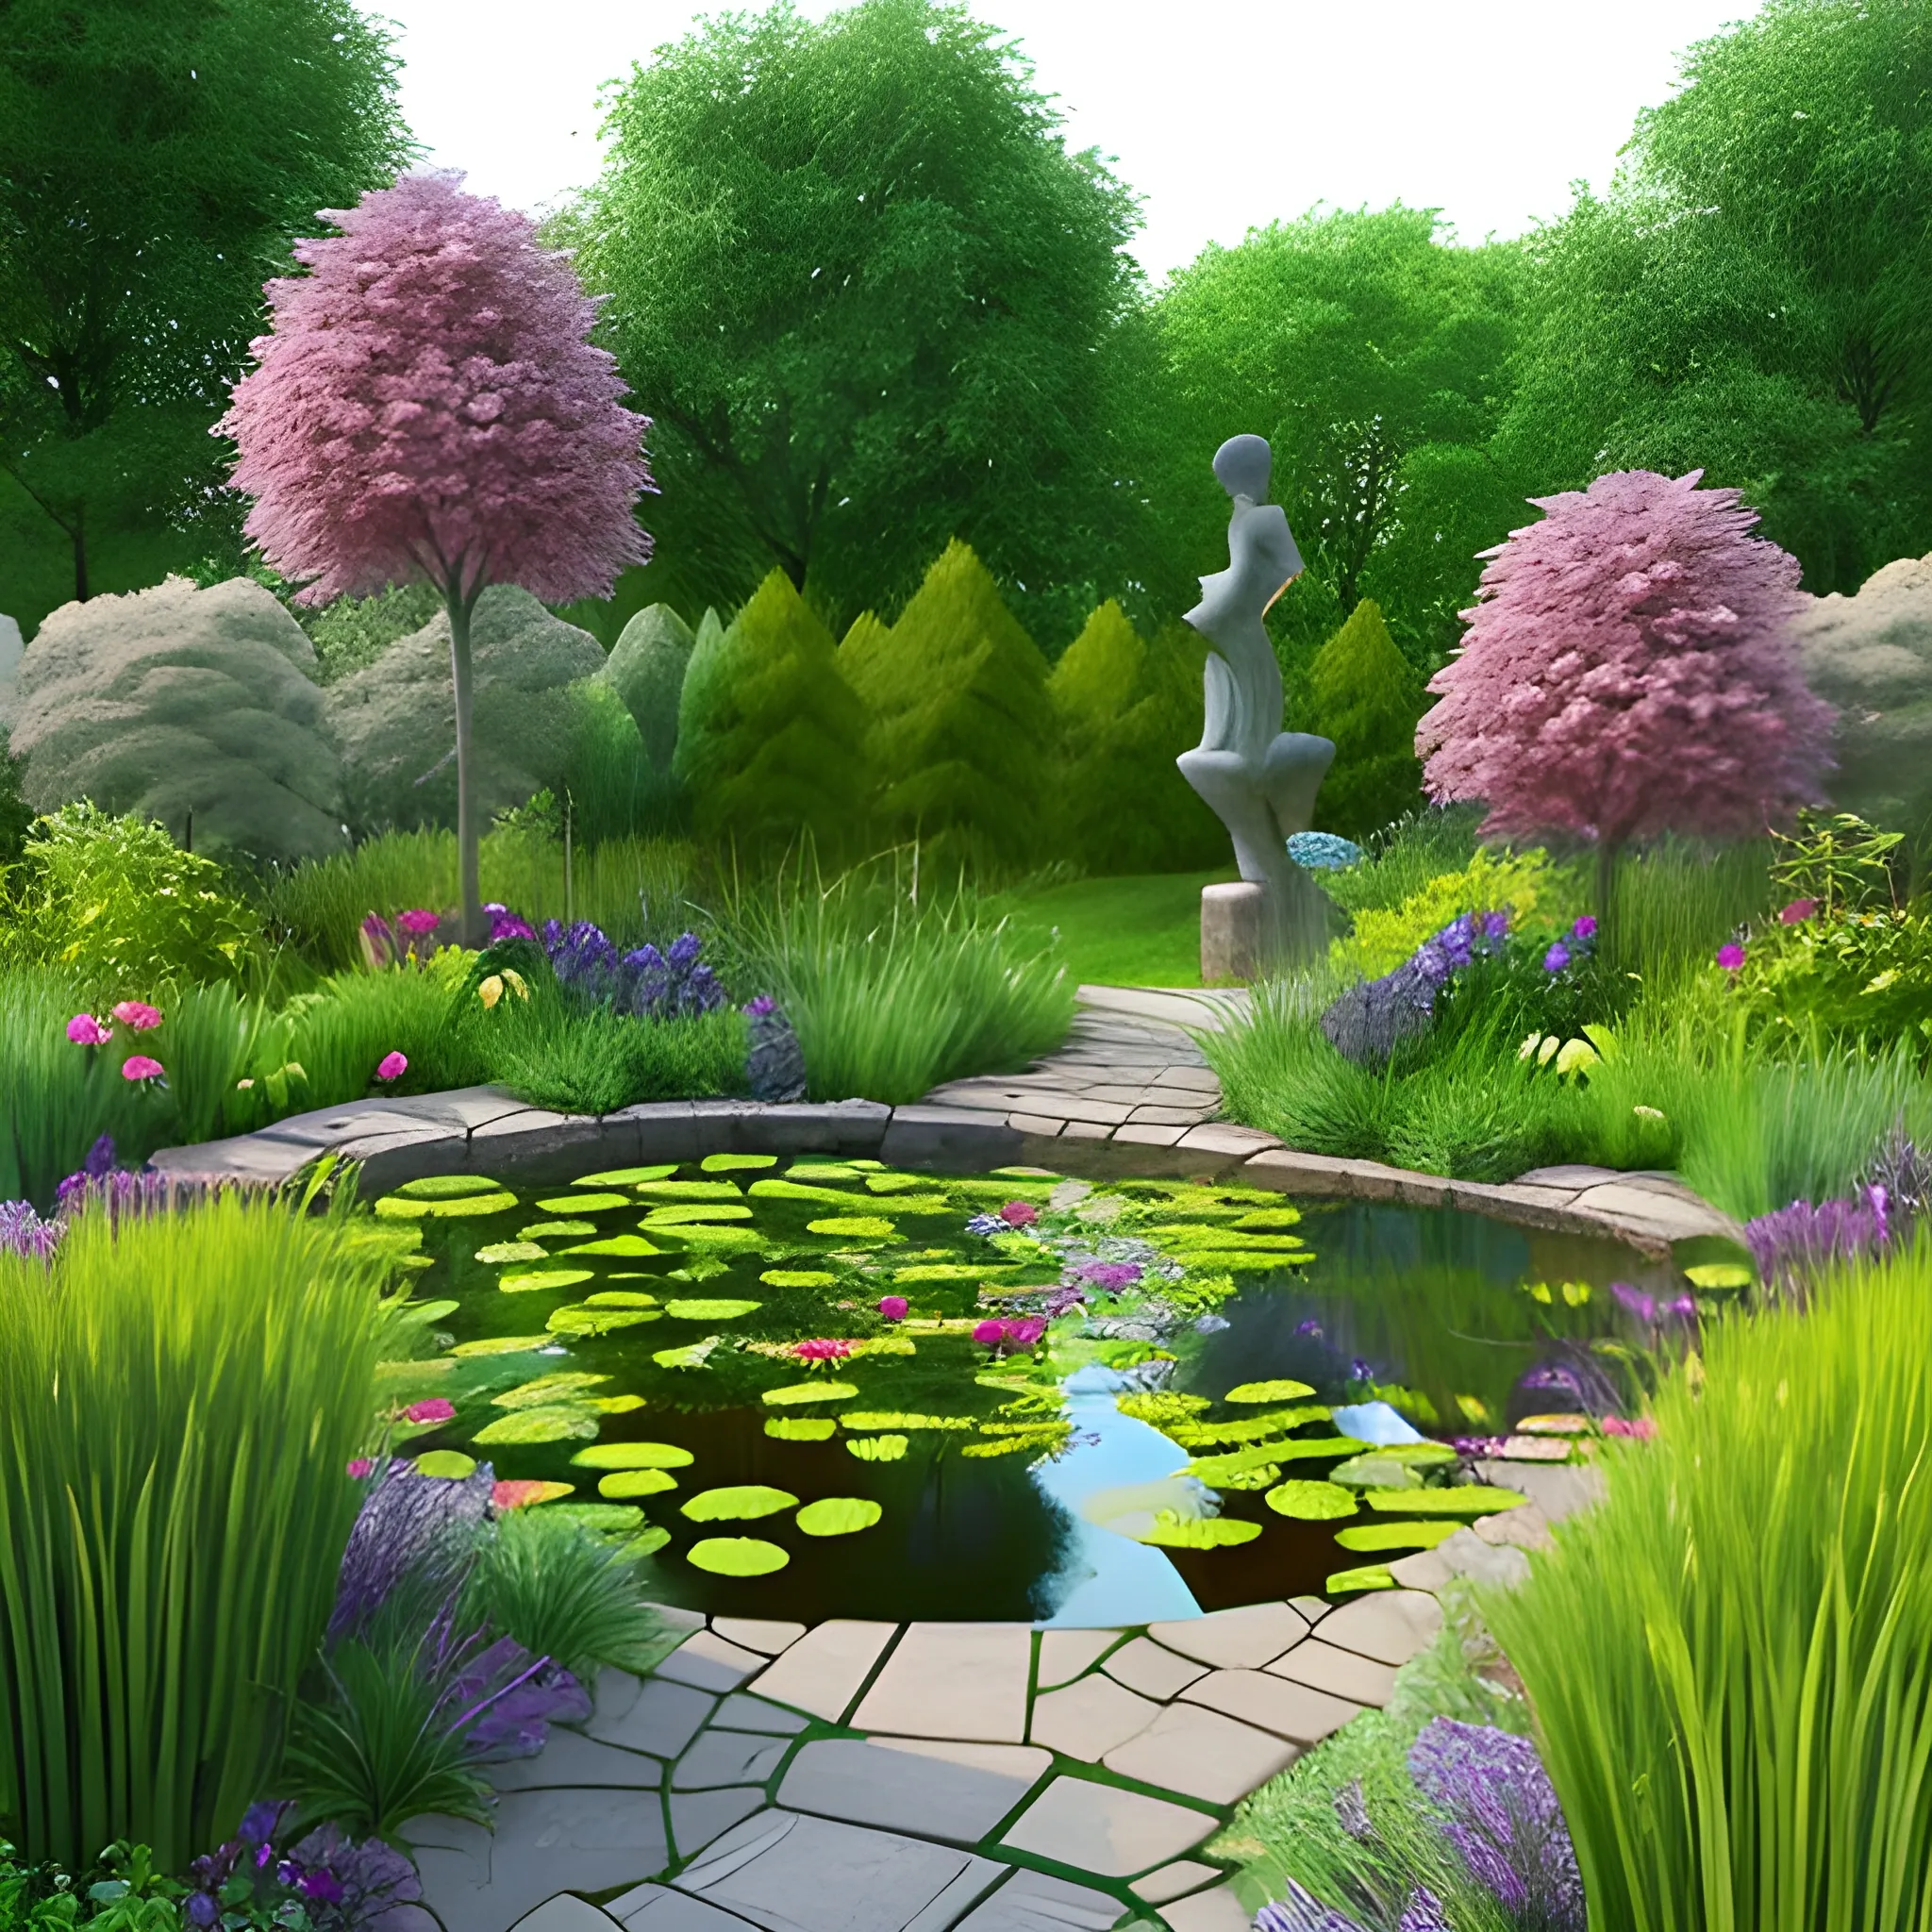 beautiful garden with sculptures and art, lots of flowers, tall grasses, 3D, pond, fish, wooden path
